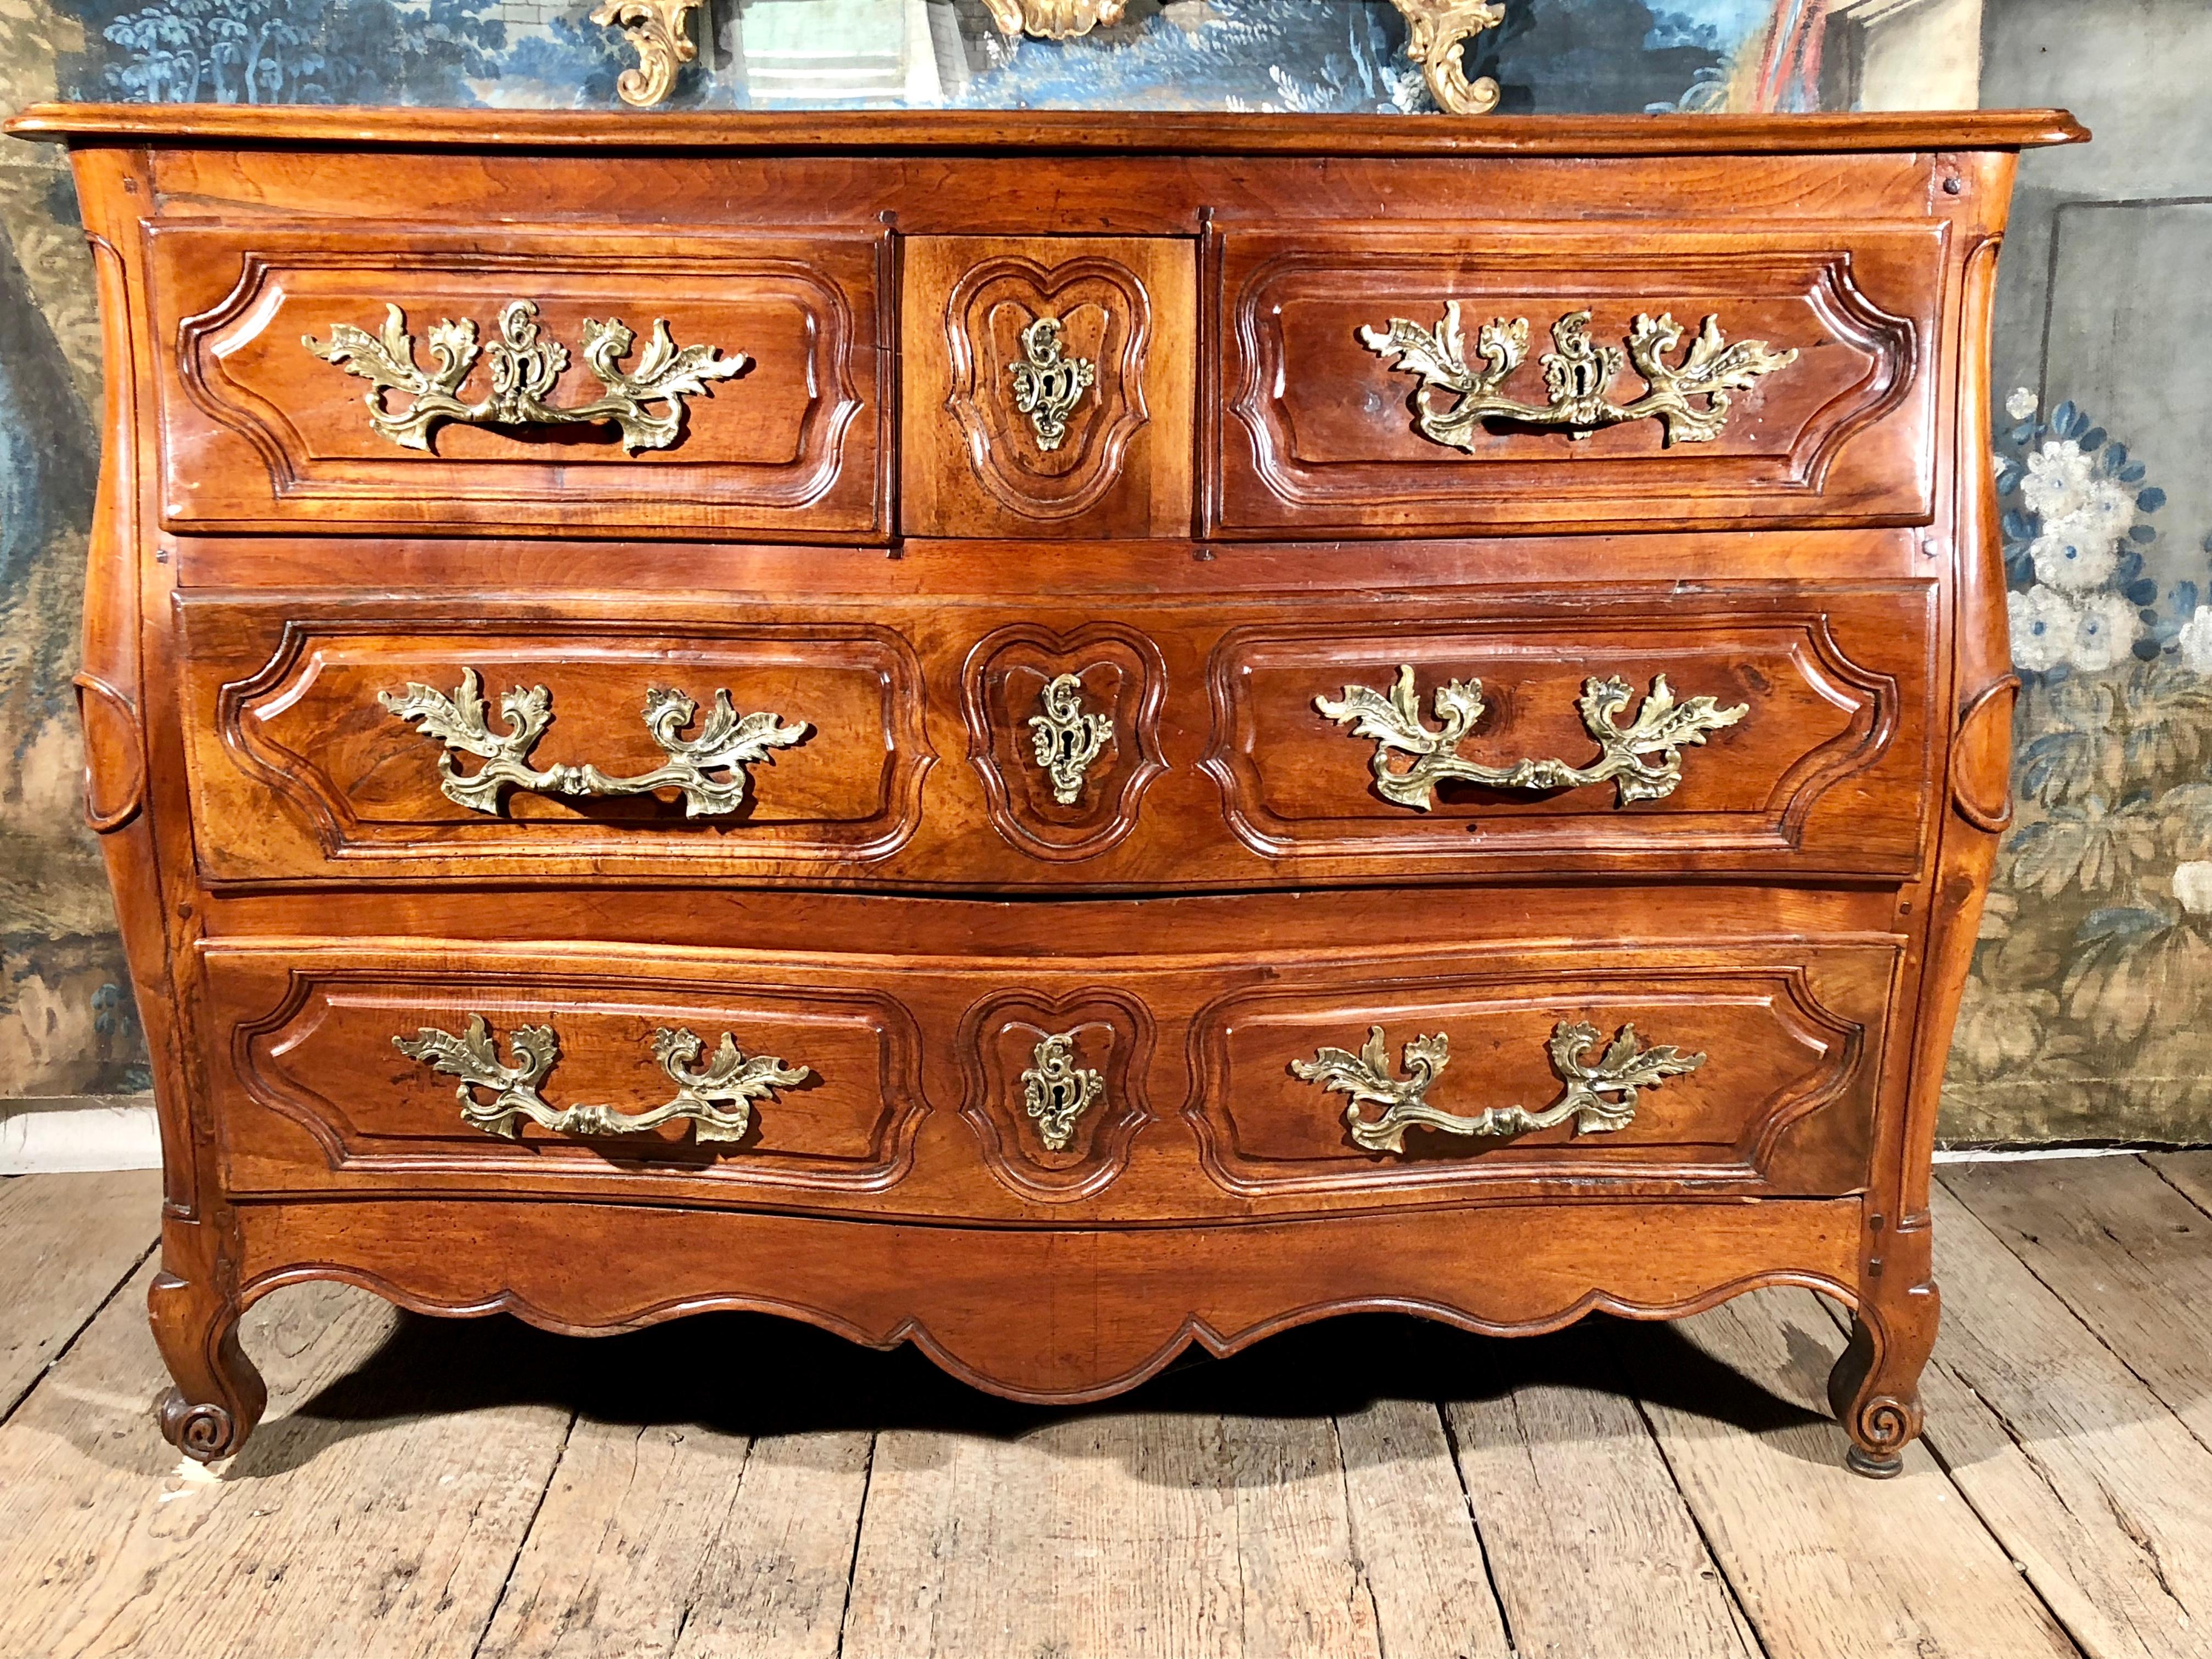 A fine Louis XV period walnut commode, the original conforming wood top over the serpentine form case with three small top drawers over two full length drawers, nicely carved and retaining its original gilt bronze hardware and working locks with